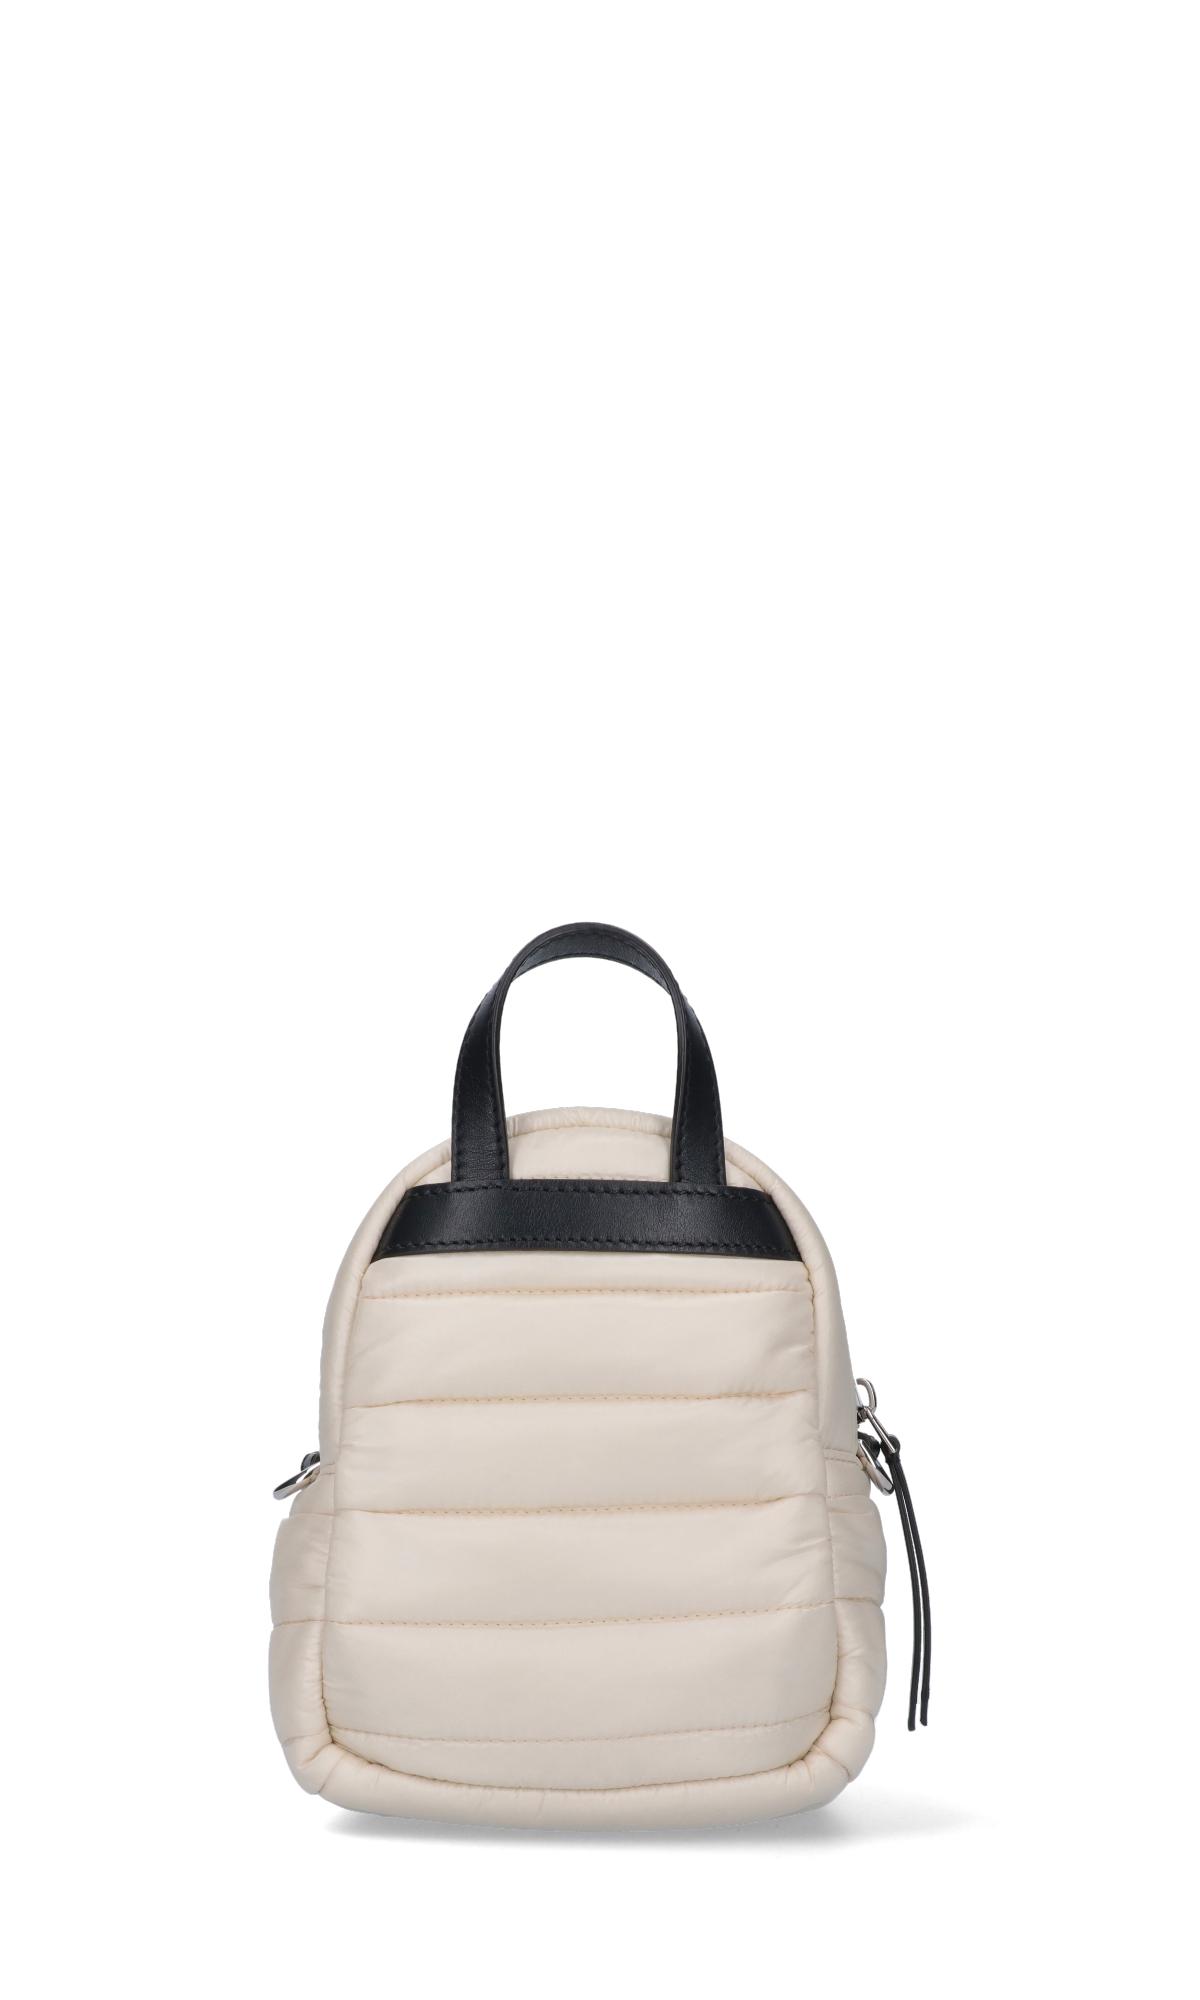 Moncler Leather Kilia Small Backpack in Beige (Natural) - Lyst